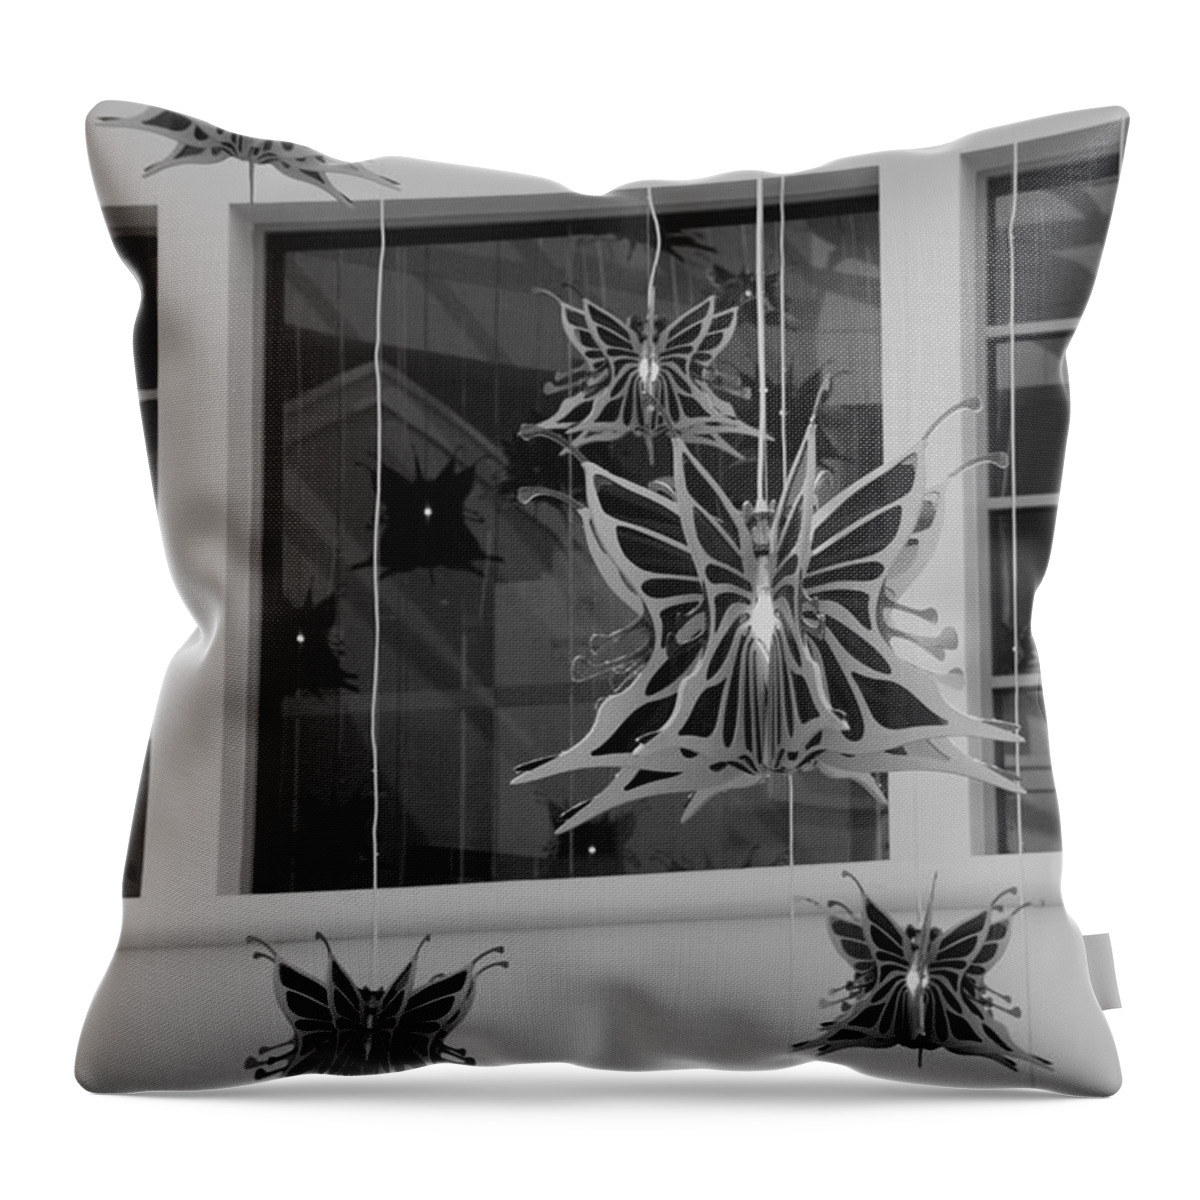 Black And White Throw Pillow featuring the photograph Hanging Butterflies #3 by Rob Hans